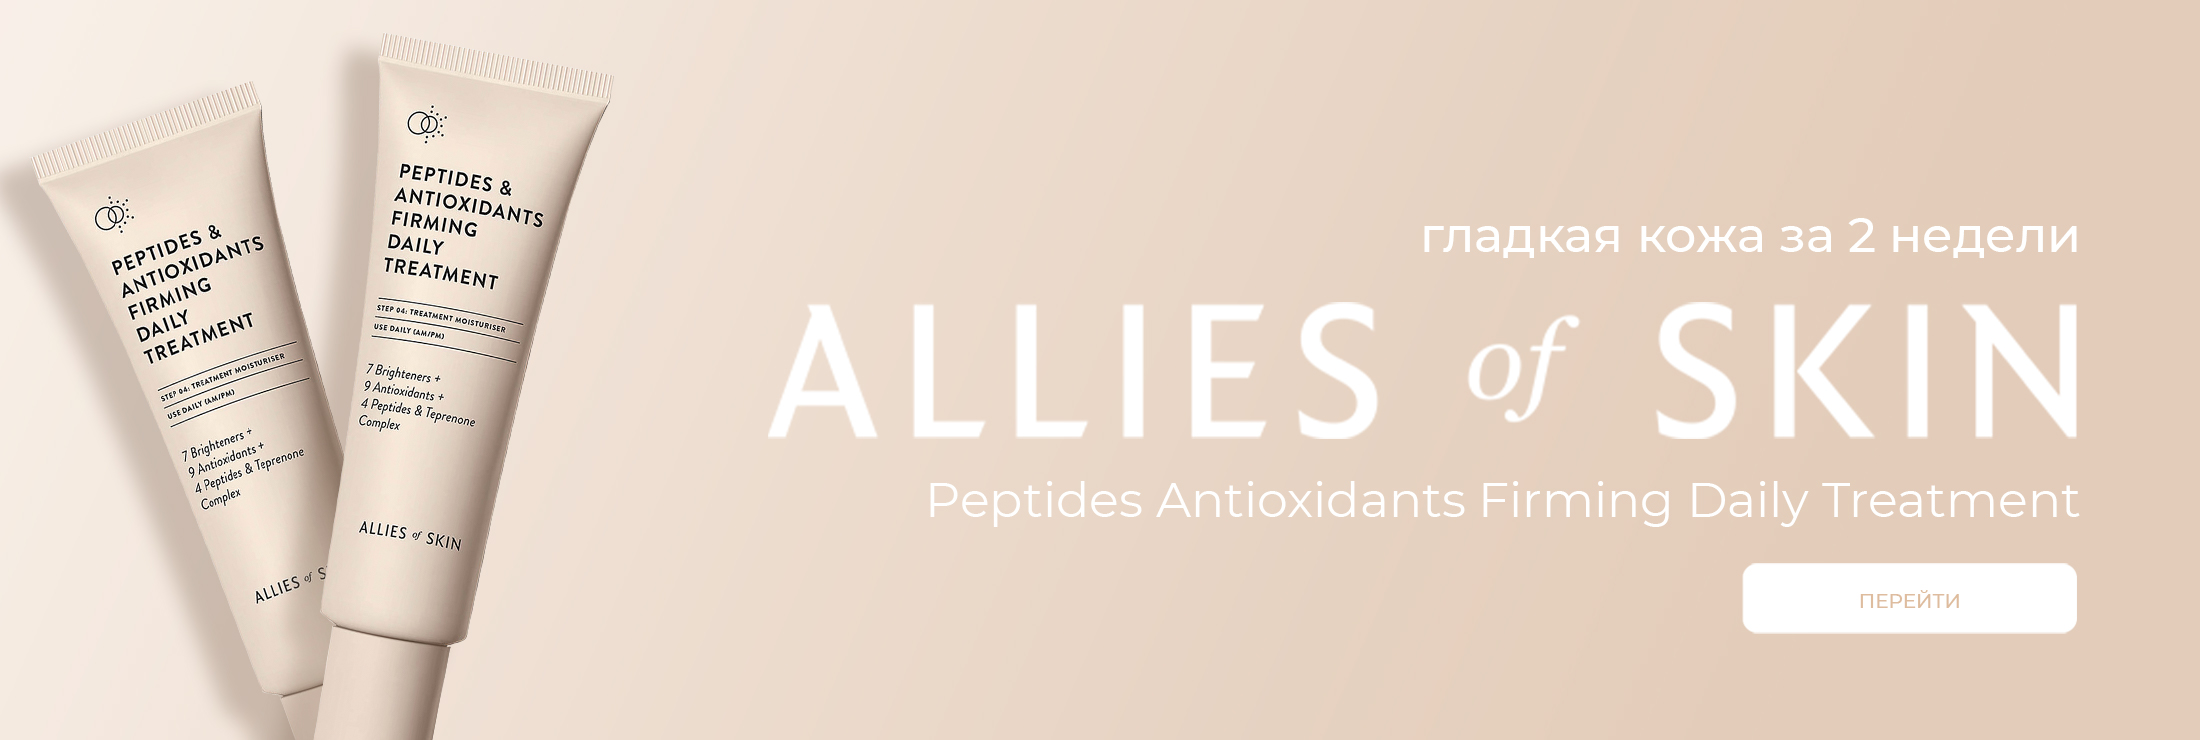 Peptides Antioxidants Firming Daily